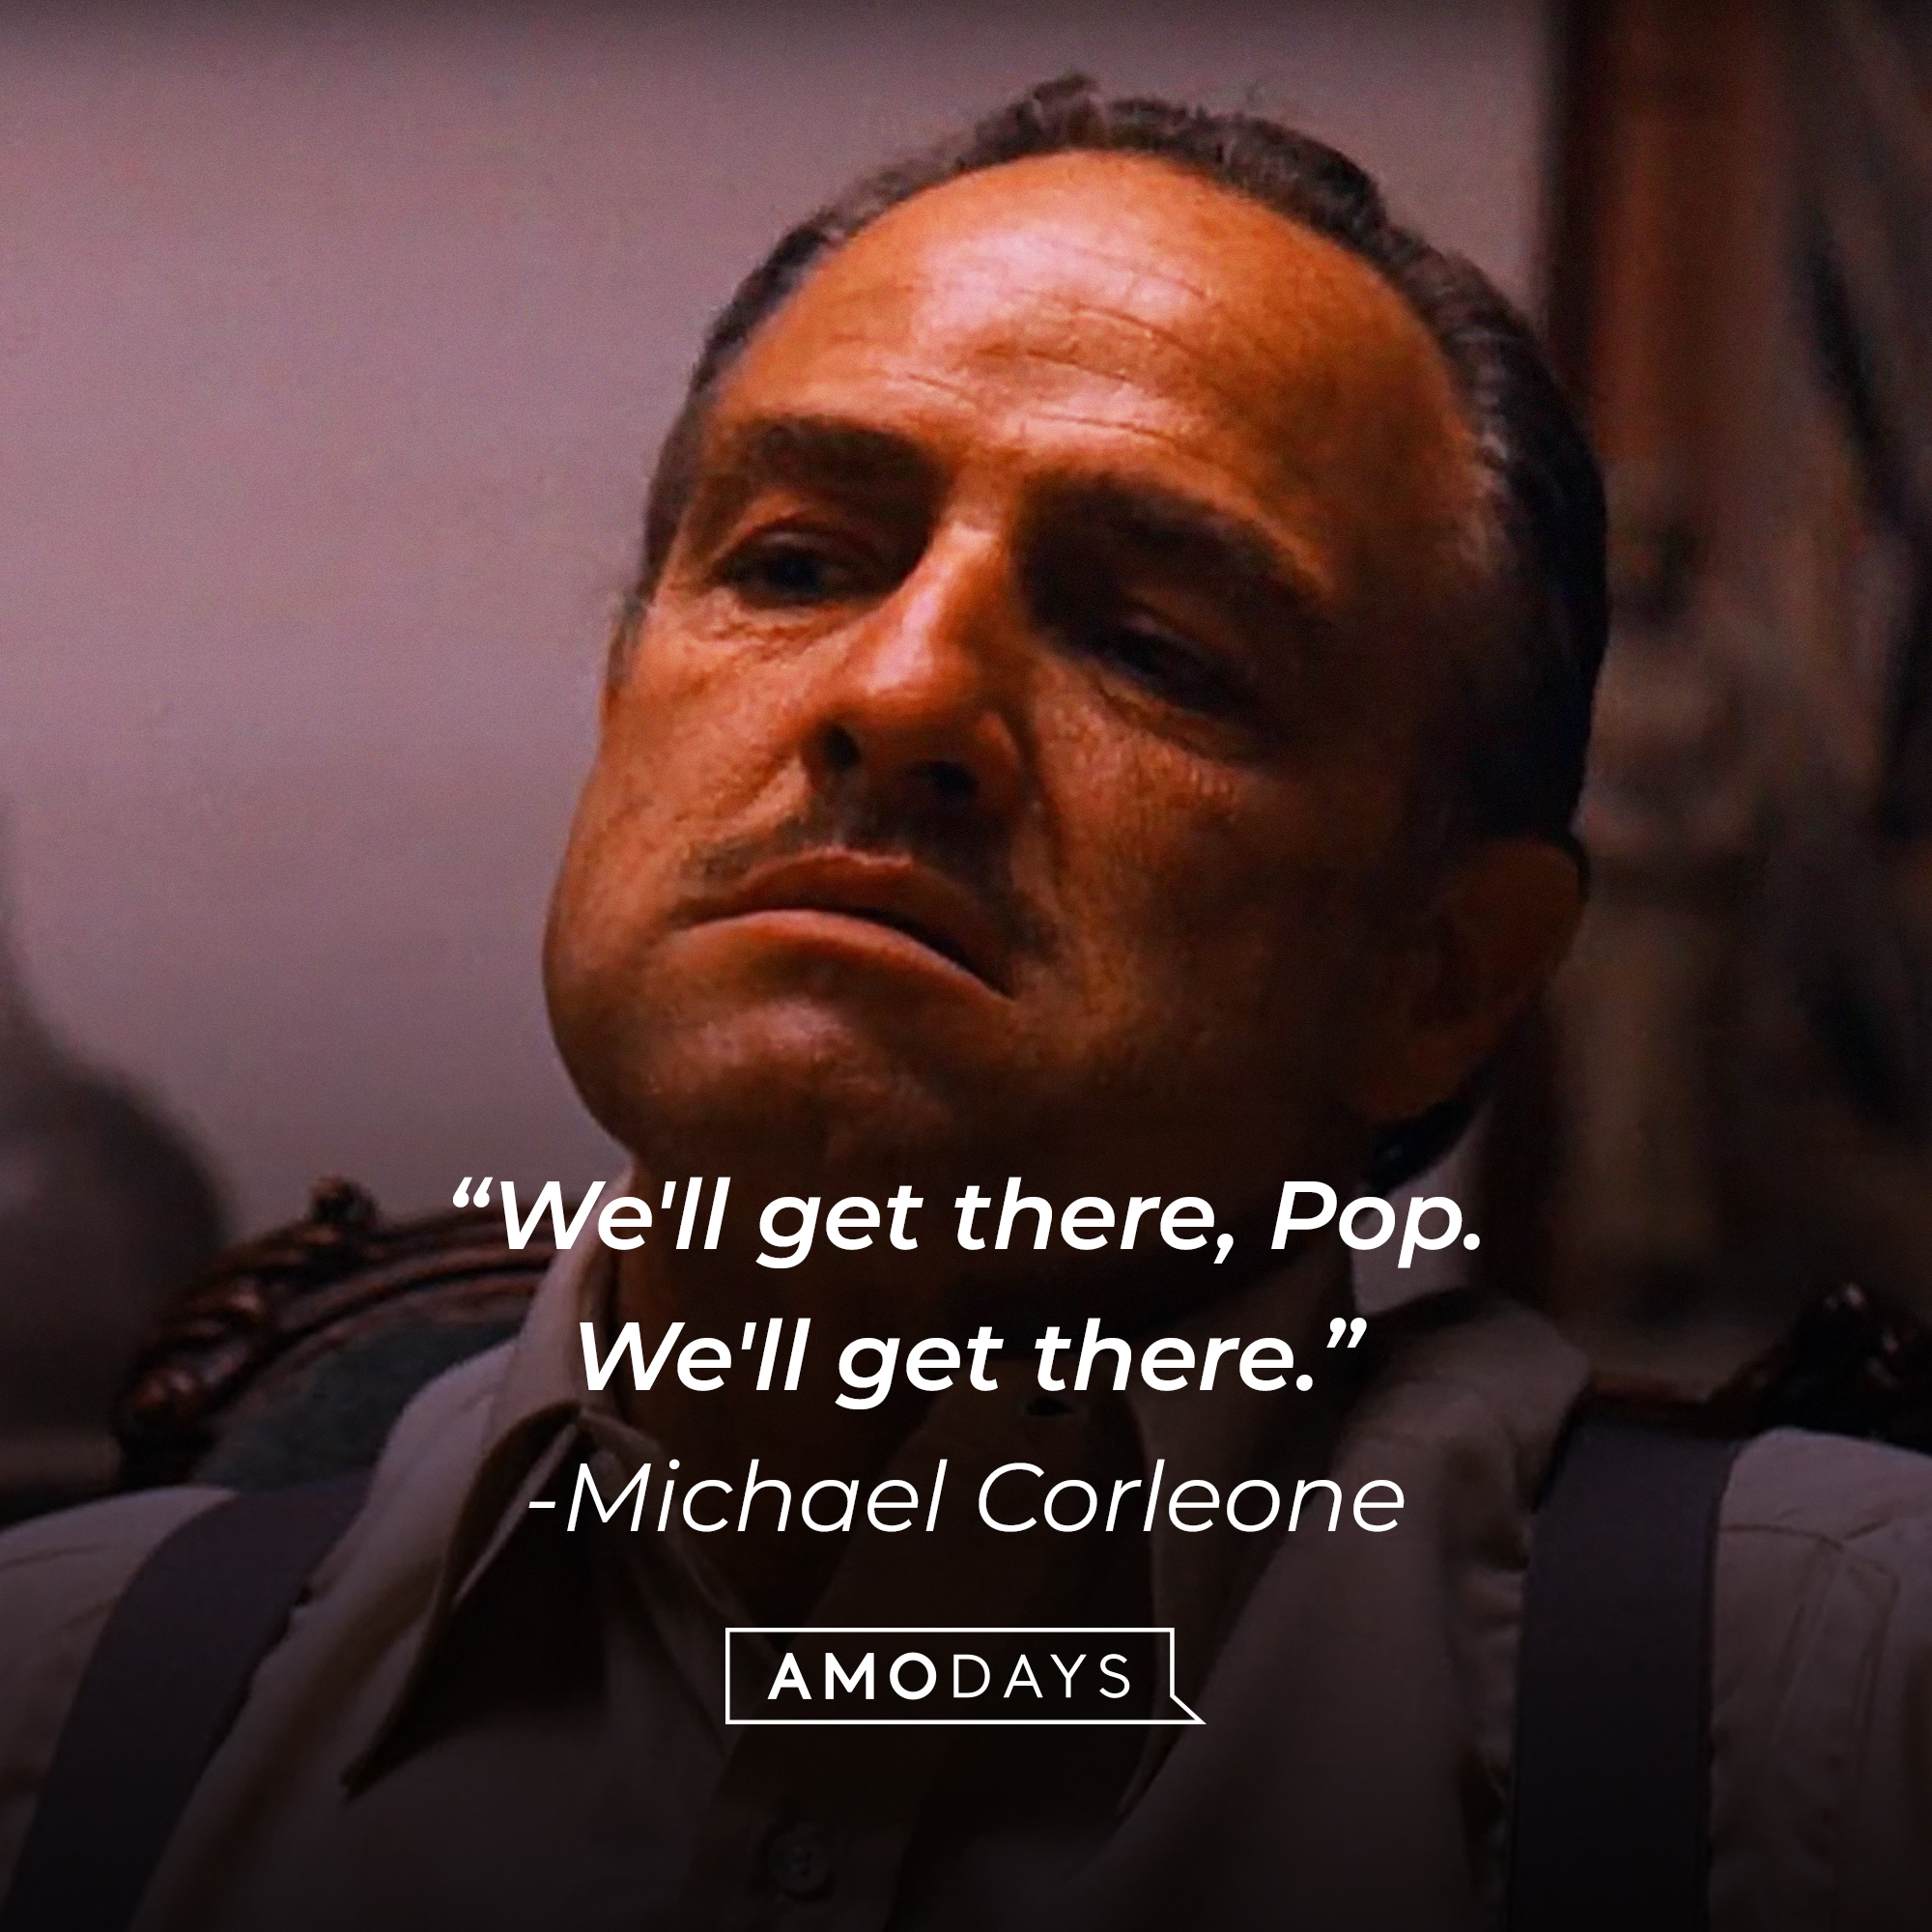 Michael Corleone's quote: "We'll get there, Pop. We'll get there." | Source: Facebook/thegodfather